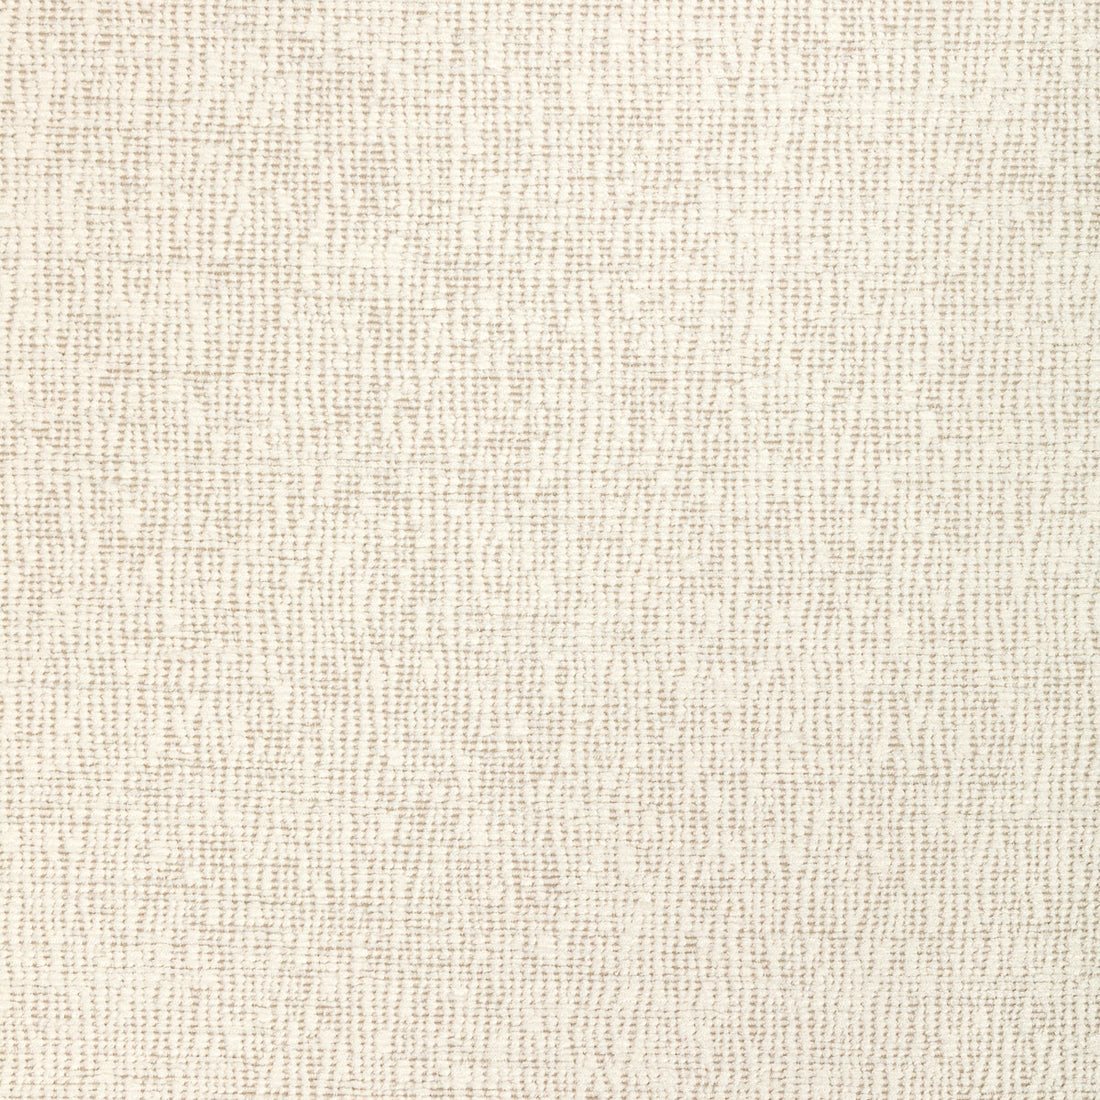 Wash Away fabric in dove color - pattern 36387.166.0 - by Kravet Design in the Crypton Home - Celliant collection